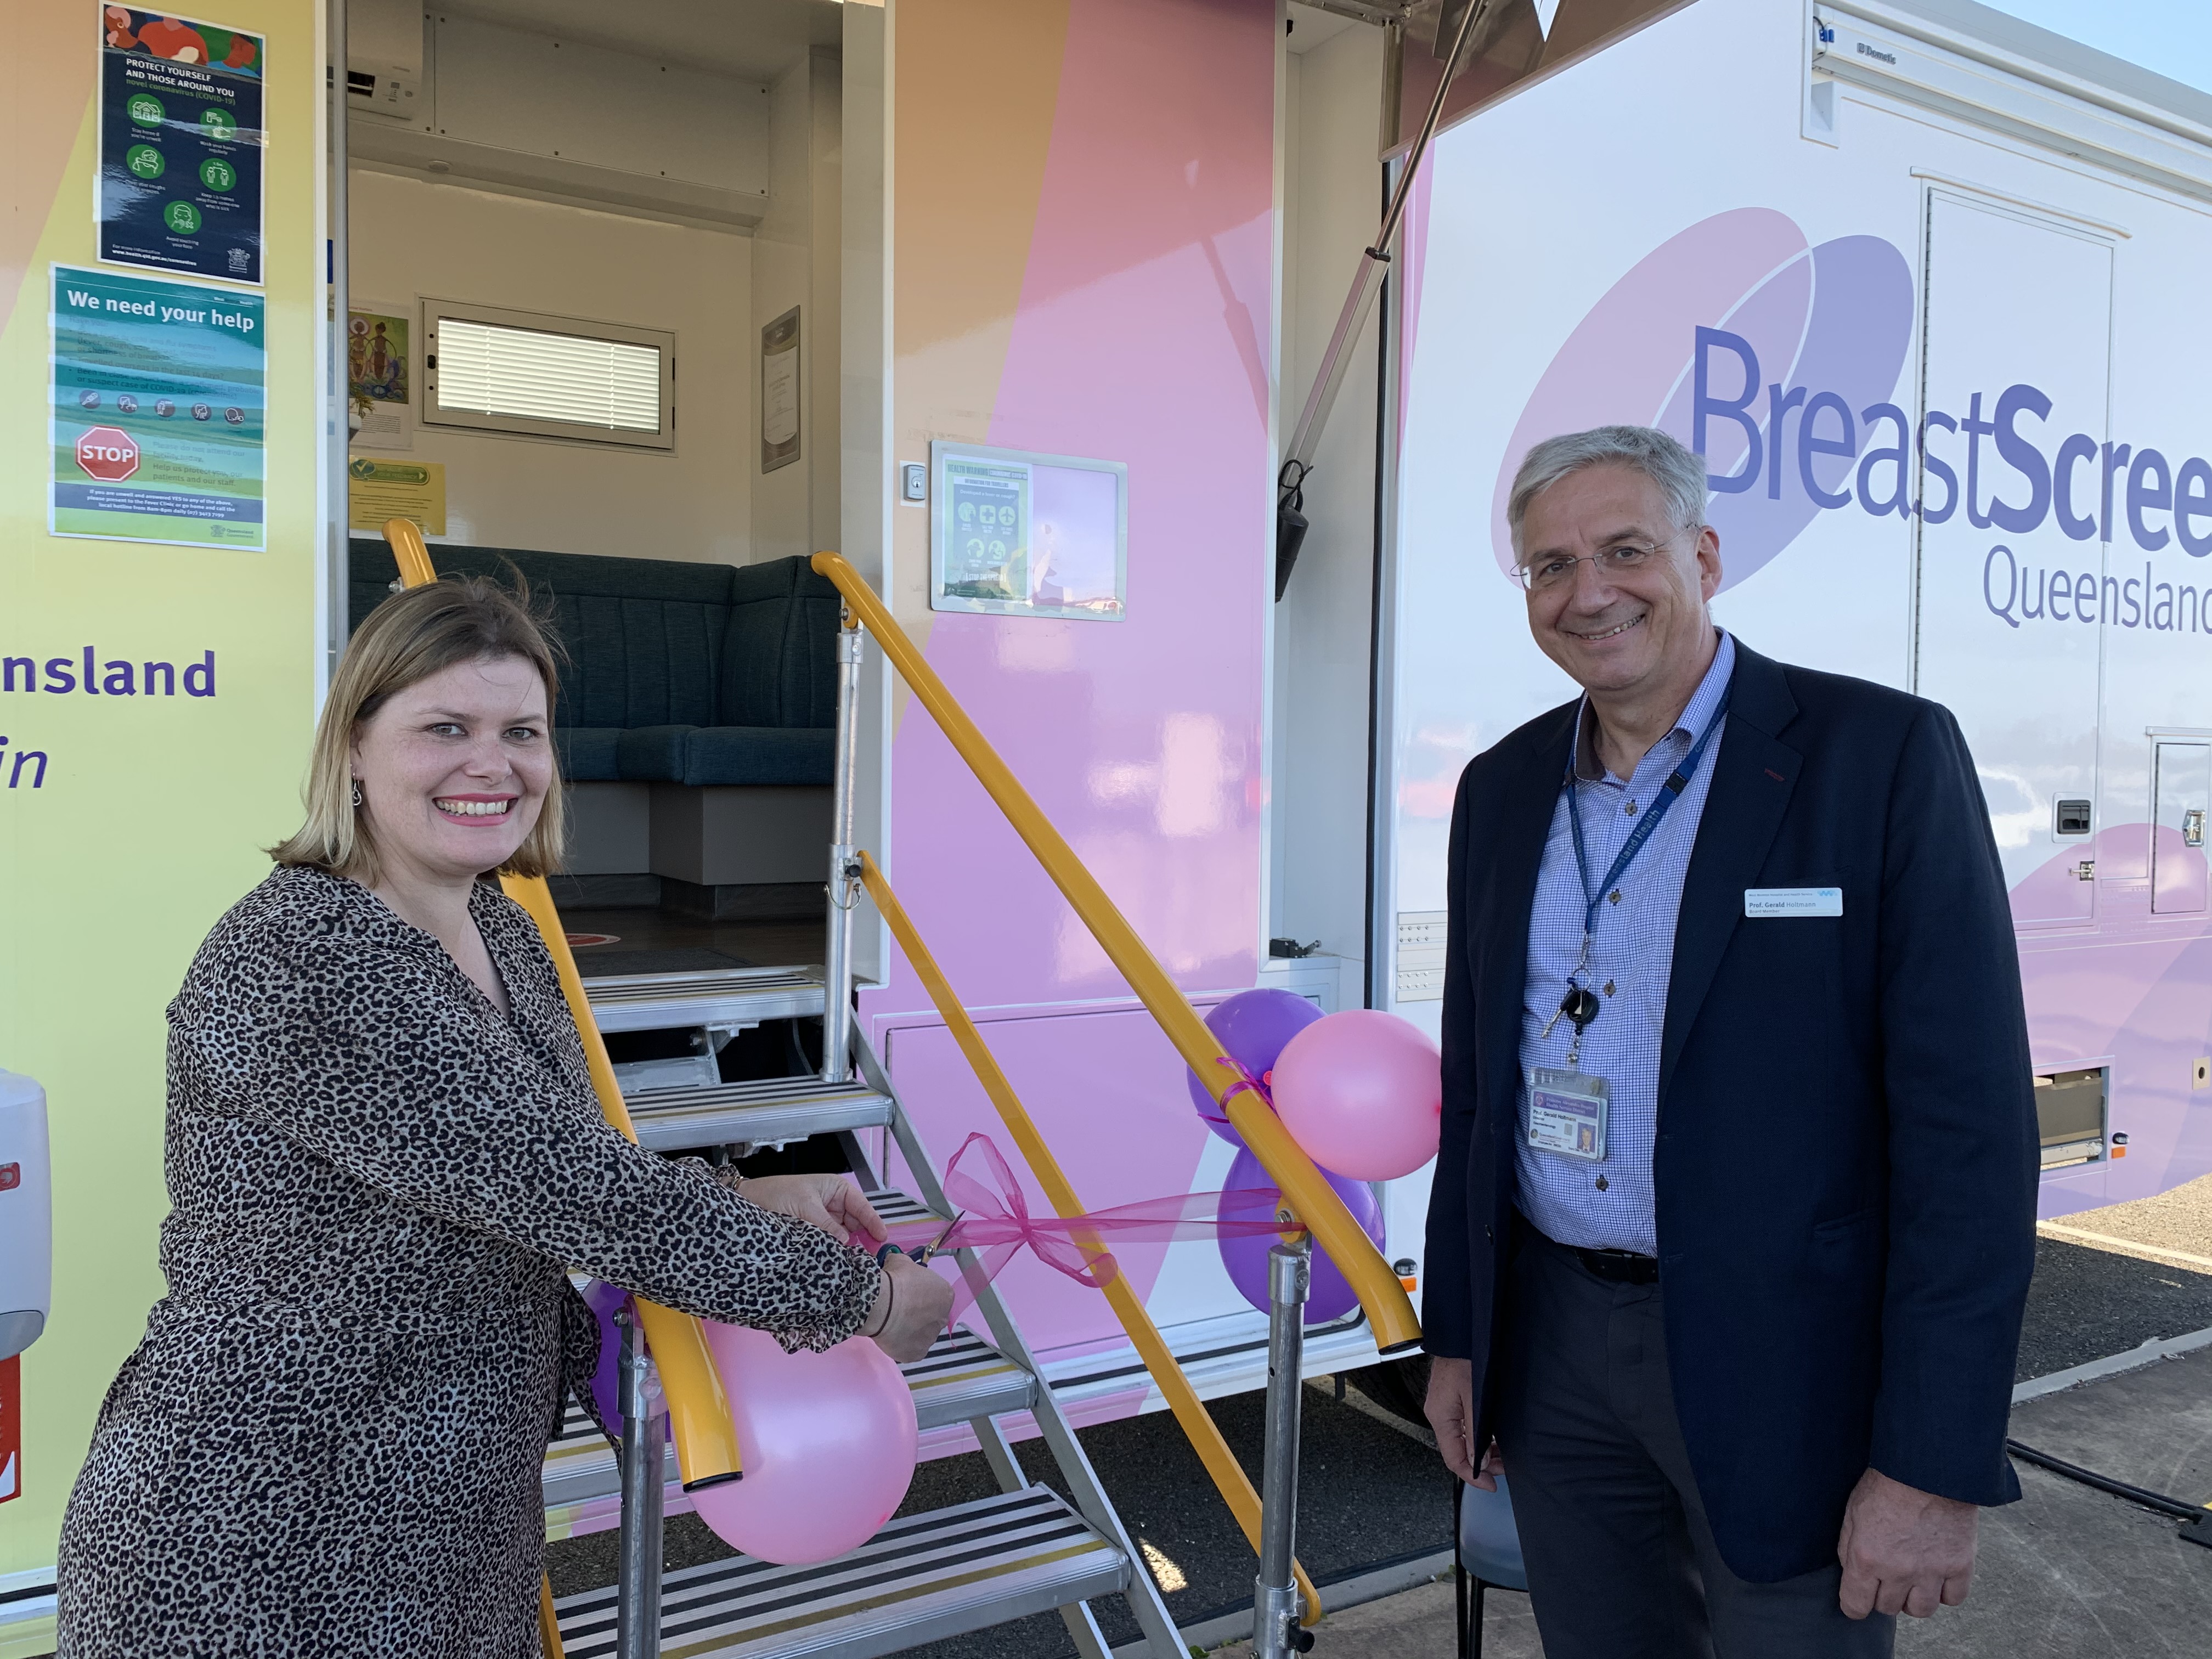 Nikki Boyd MP and Proff Gerald Holtmann at new BreastScreen van launch